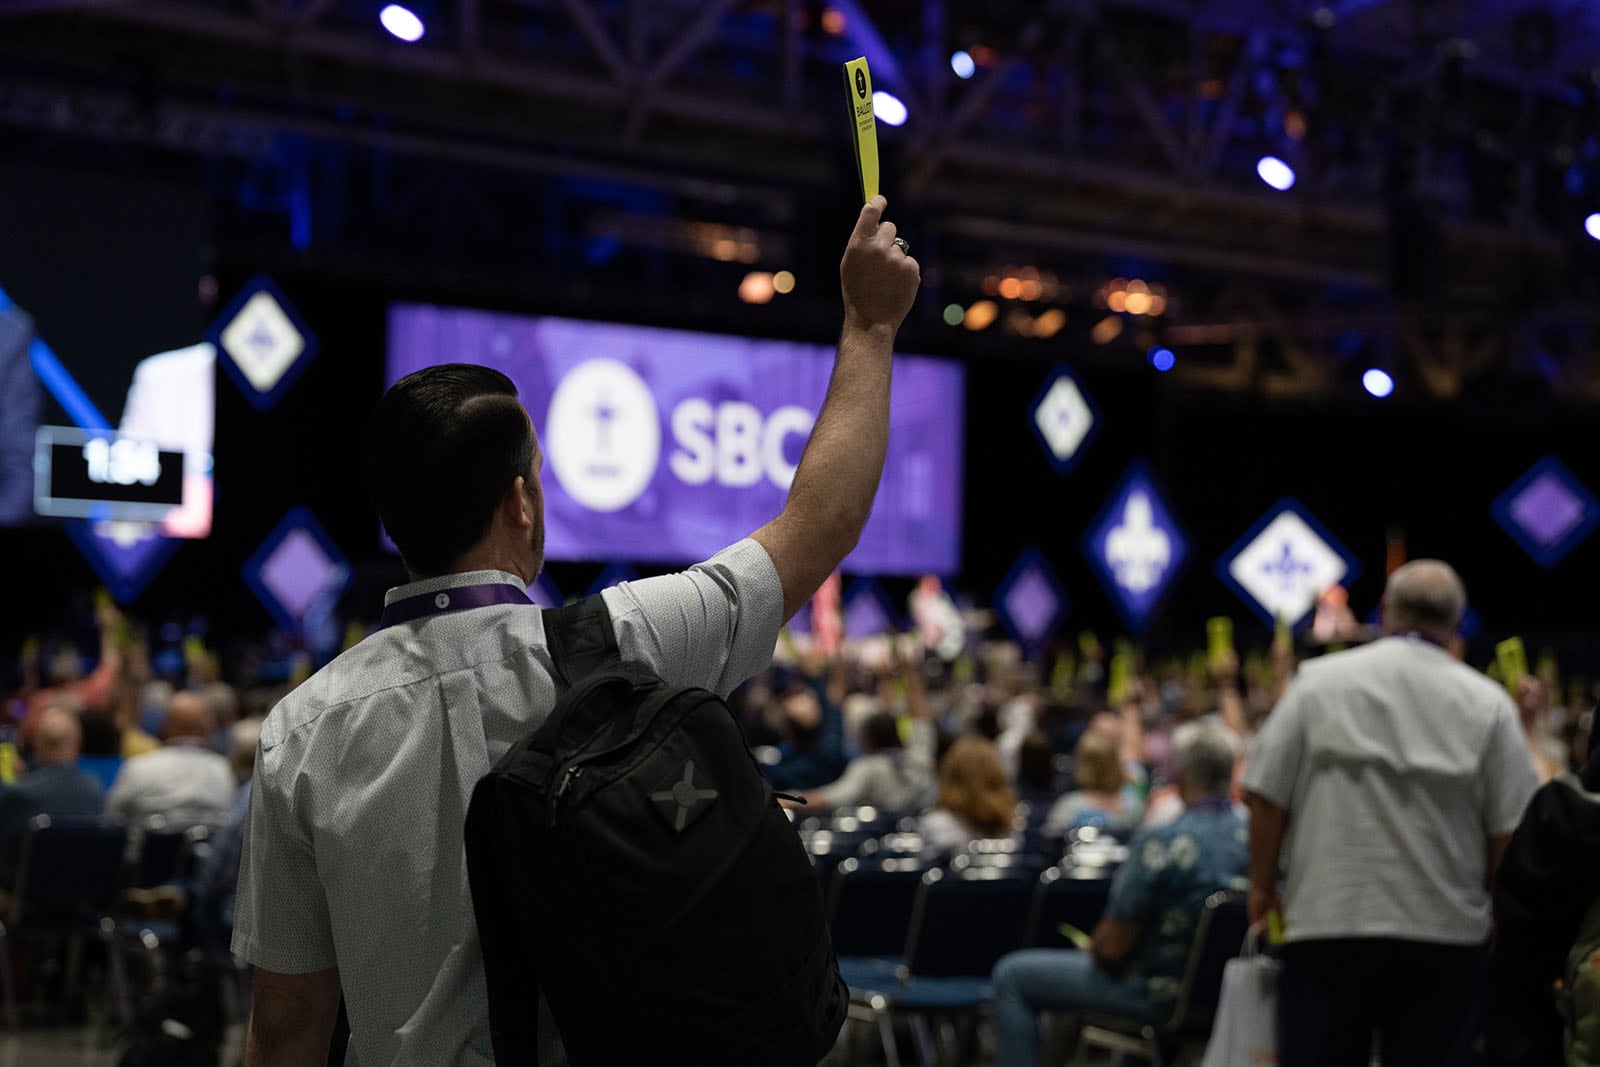 SBC23 and SBC24 – A Note from our EDT Tony Wolfe